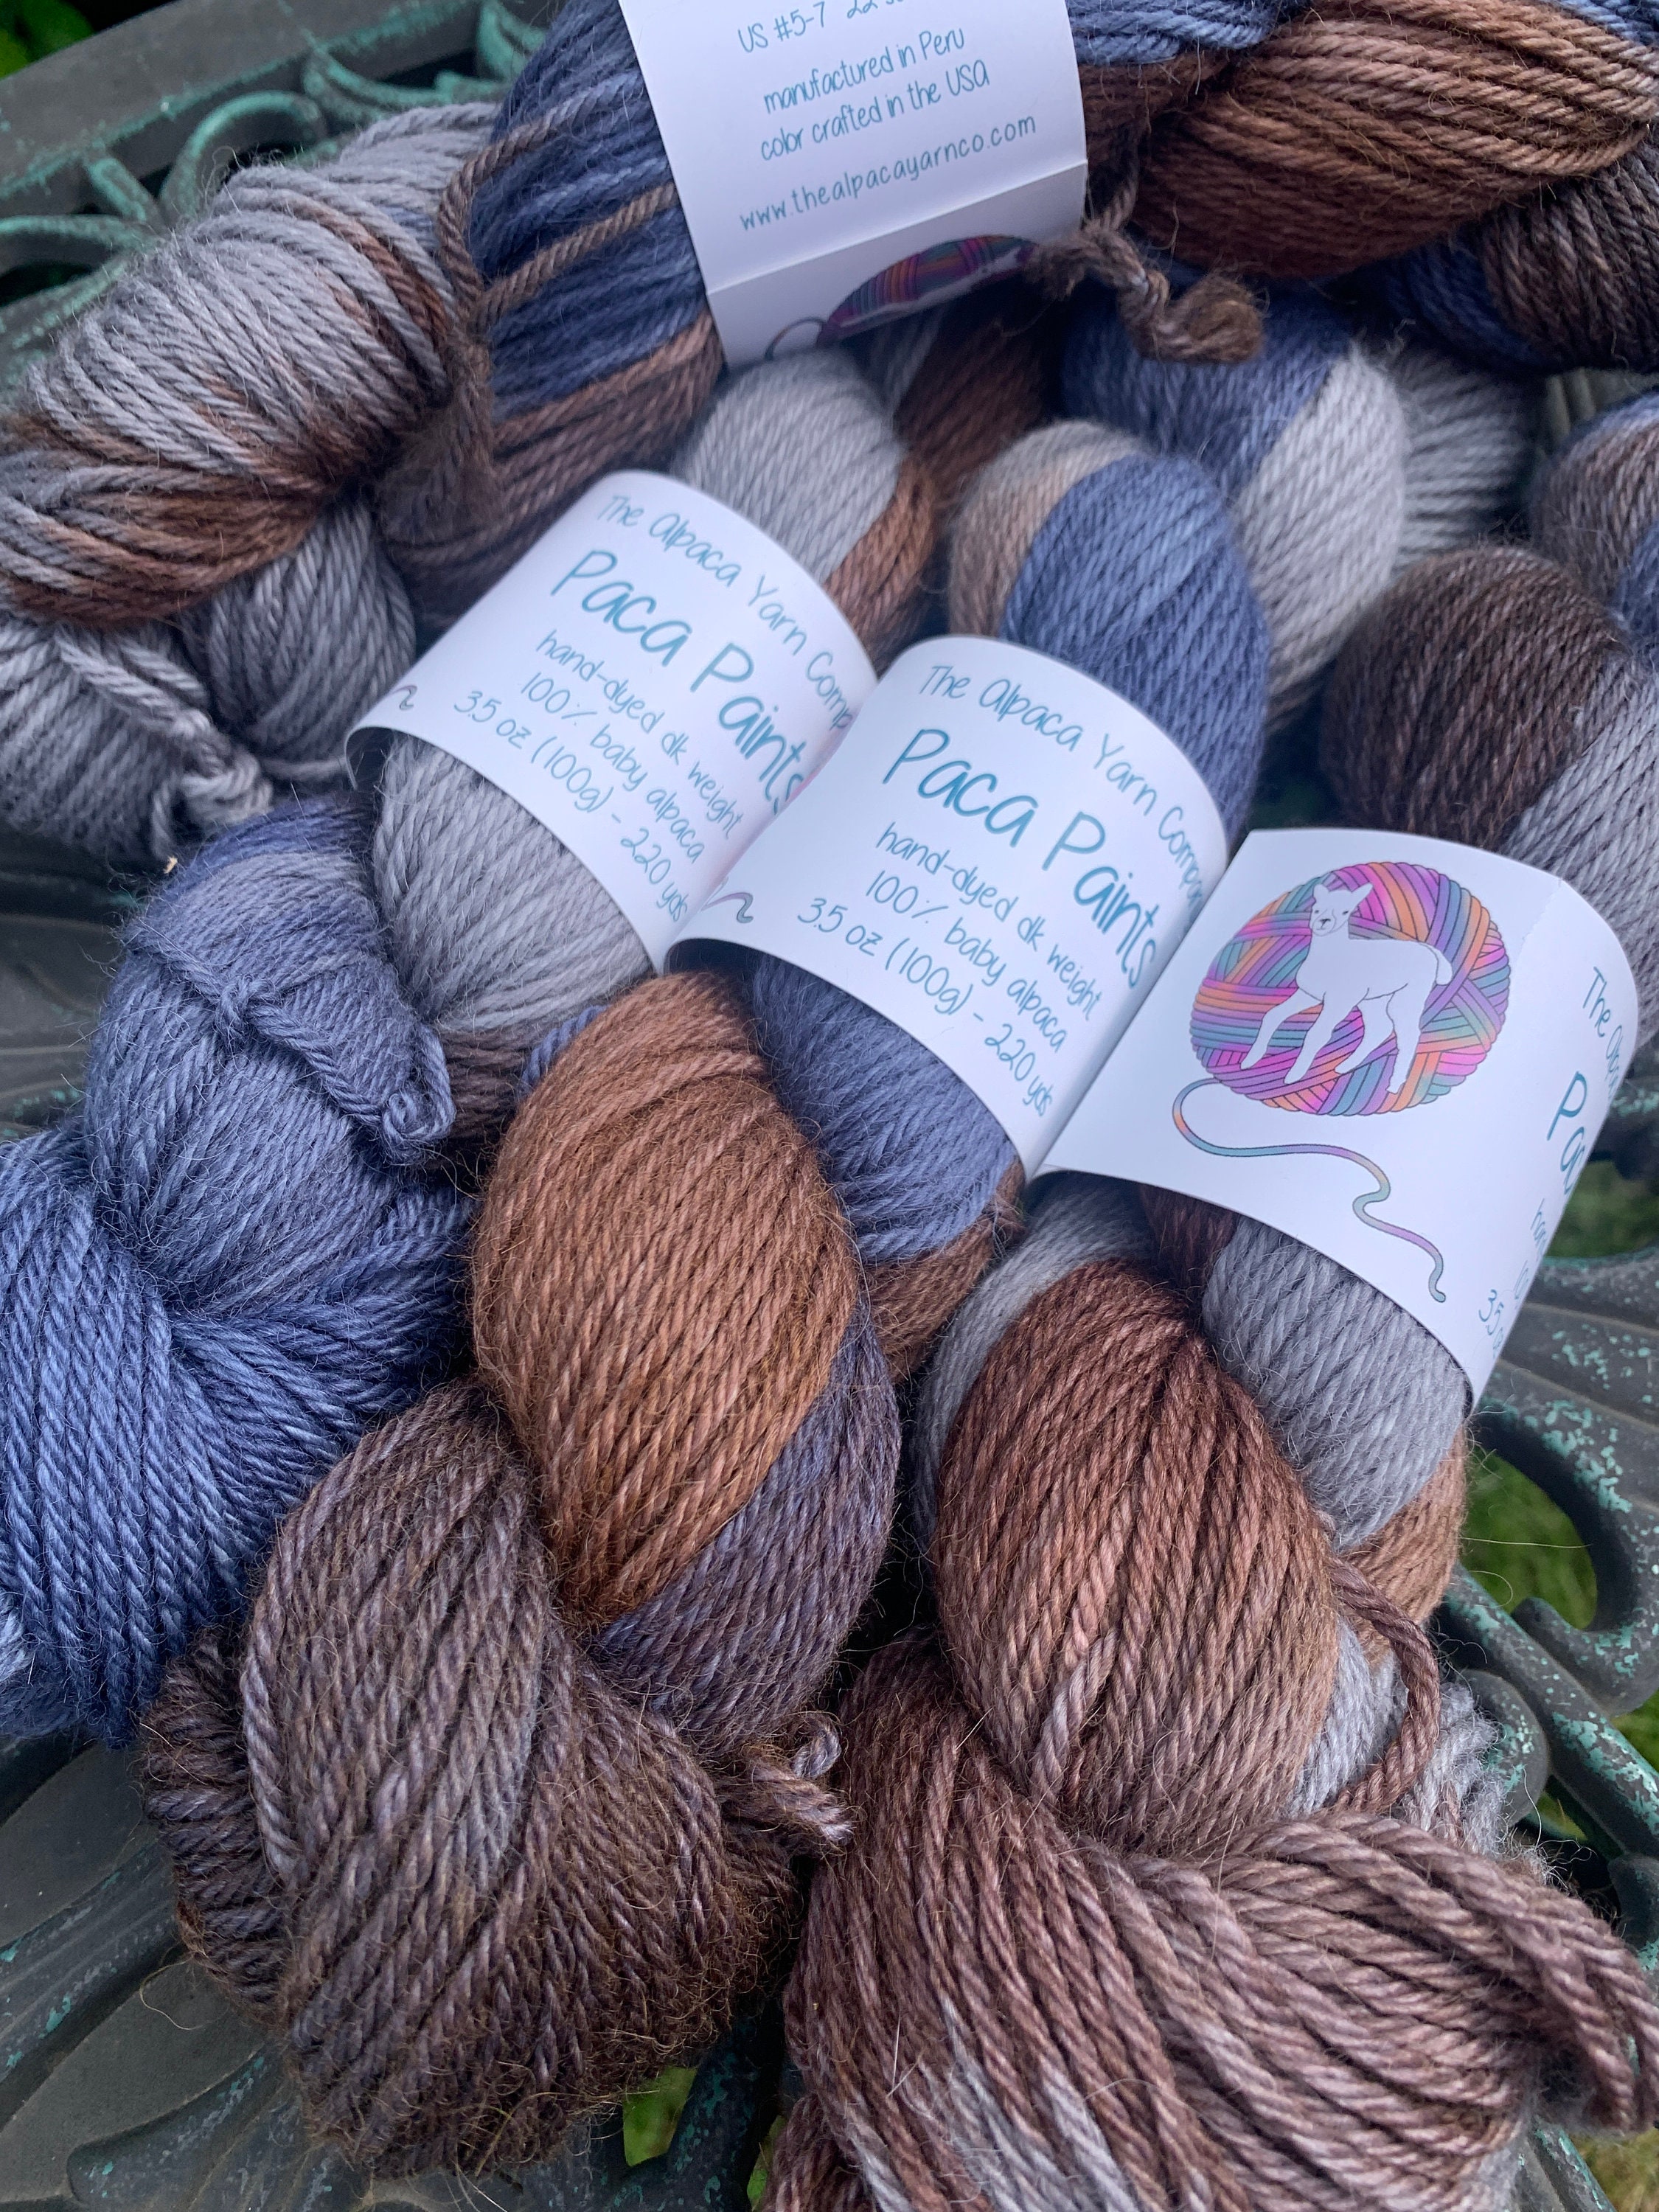 Blend Alpaca Yarn Wool 2 Skeins 200 Grams DK Weight - Heavenly Soft and  Perfect for Knitting and Crocheting (Navy Blue, DK Weight)